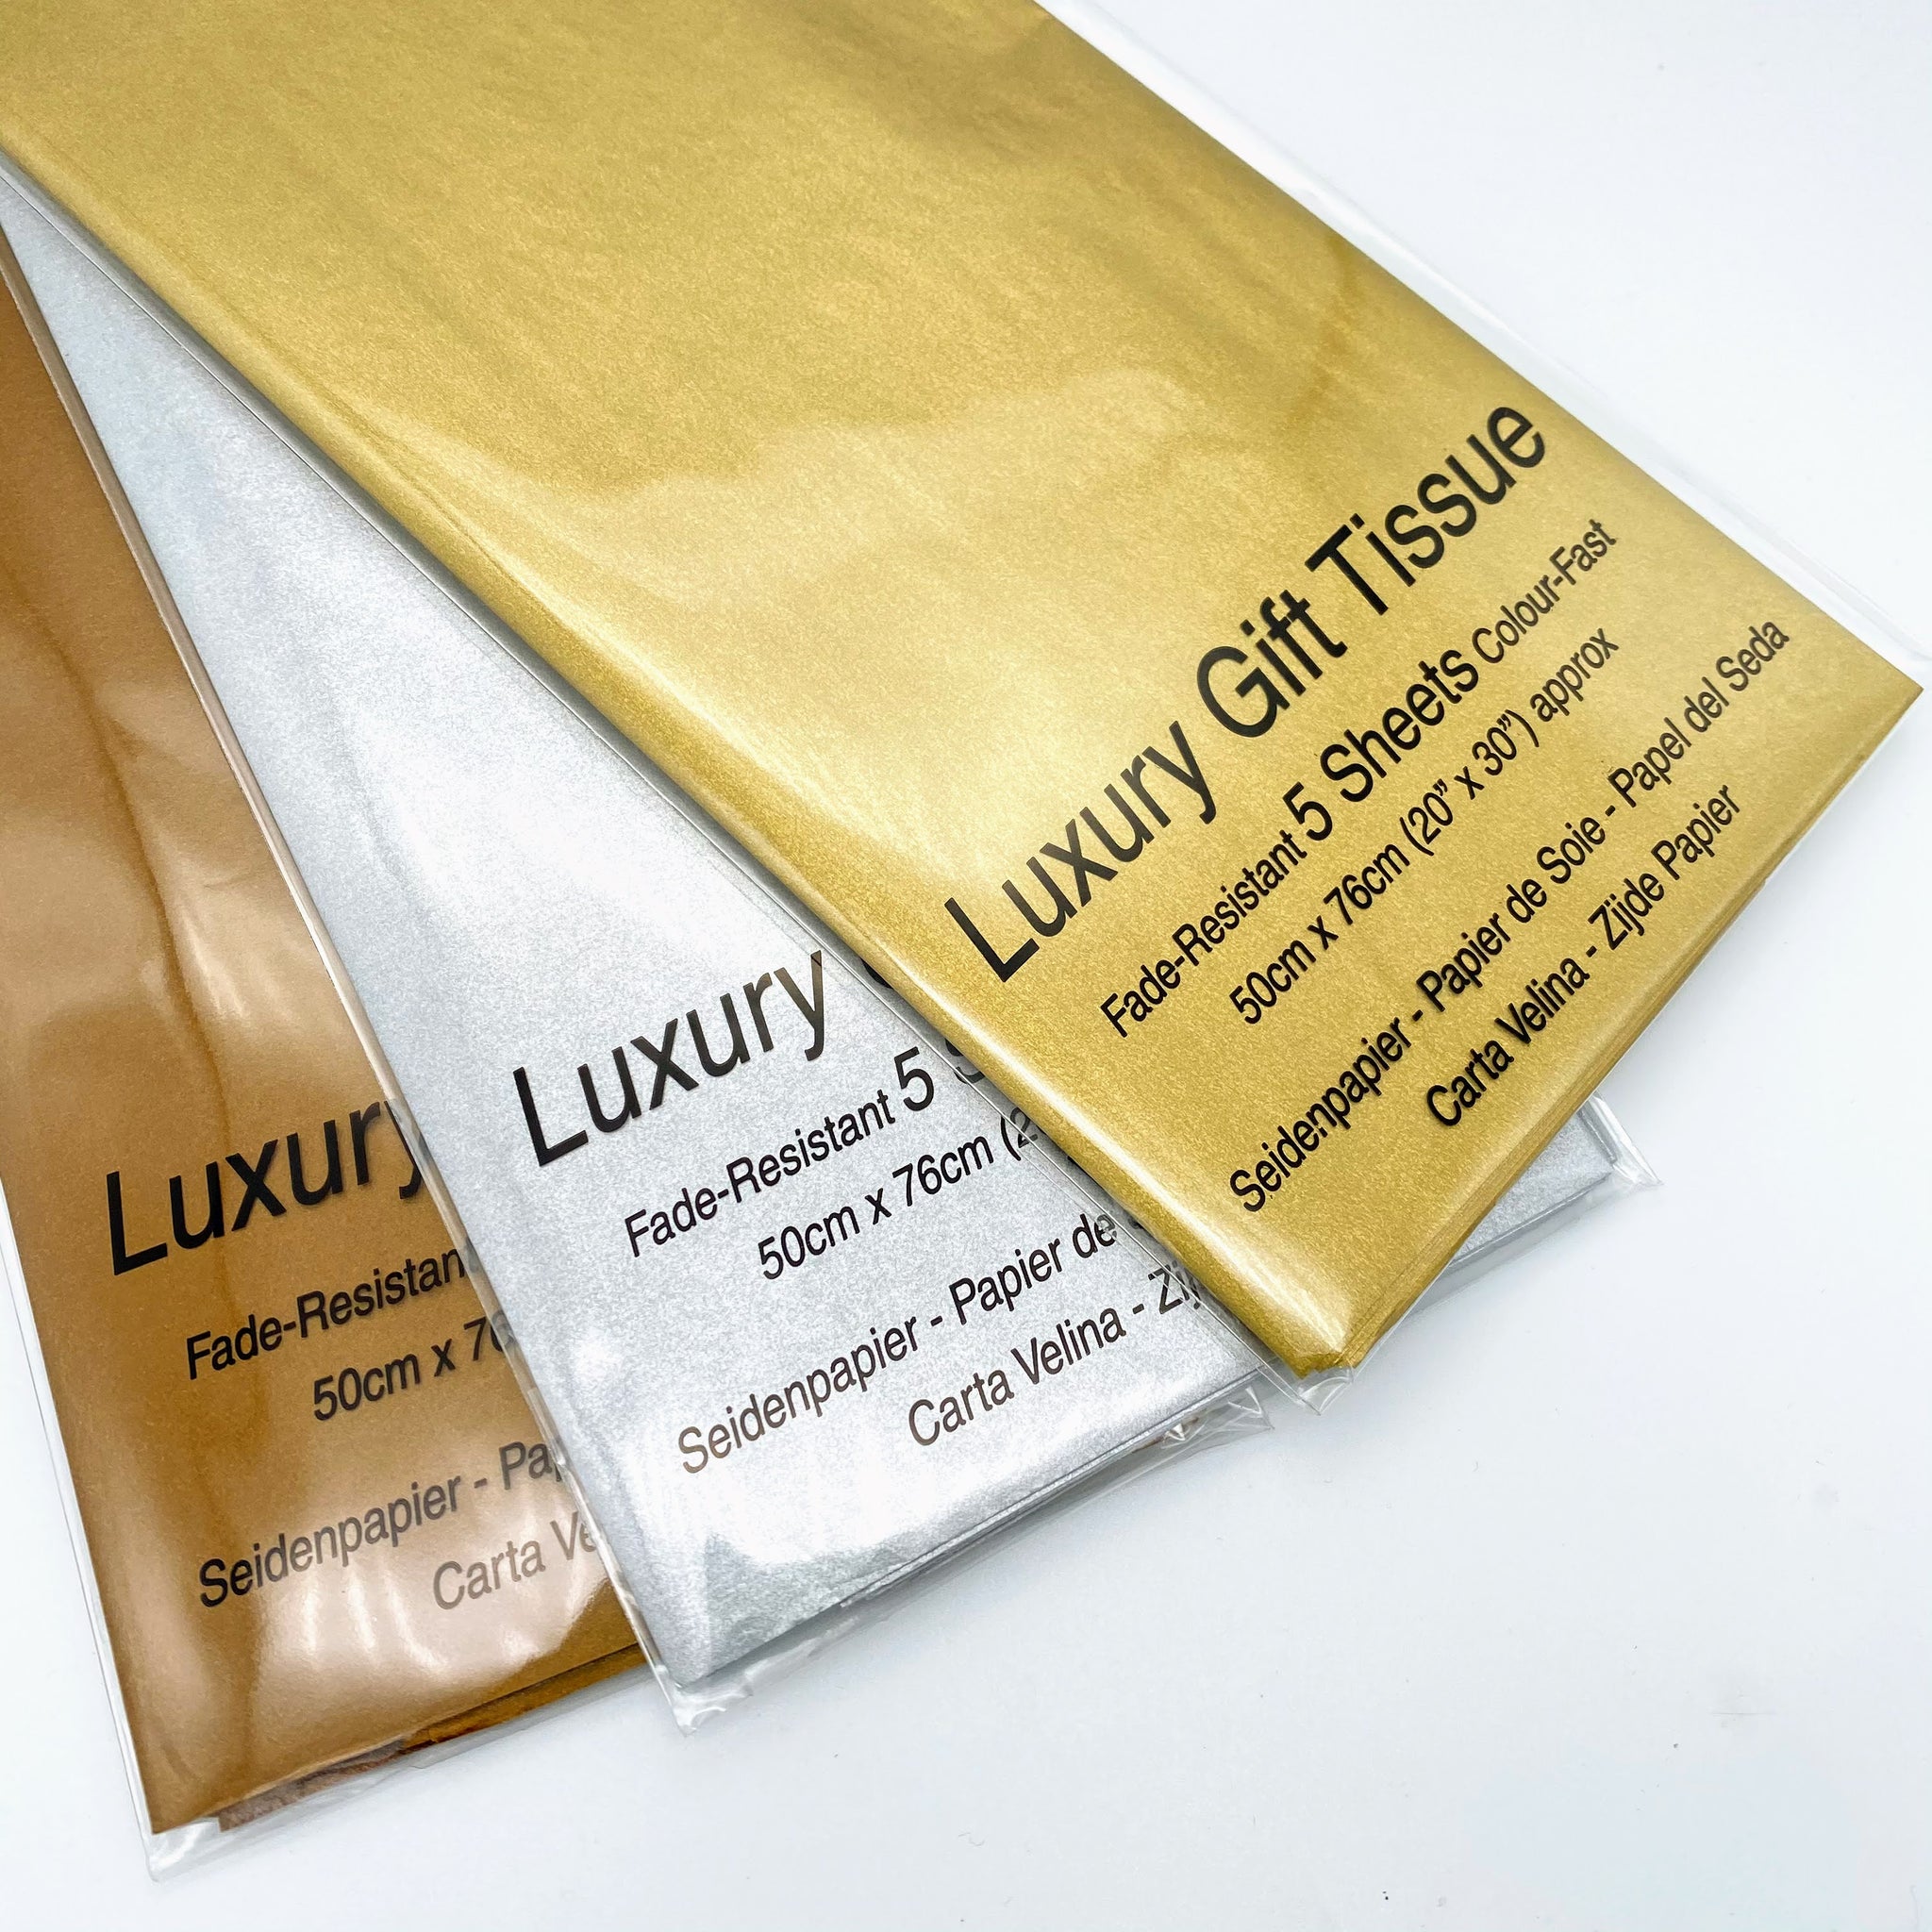 5x sheets Double Sided Metallic Tissue Paper - Choose from Gold, Copper,  Silver, Rose Gold colour packs. Great for luxury wrapping/gifts.